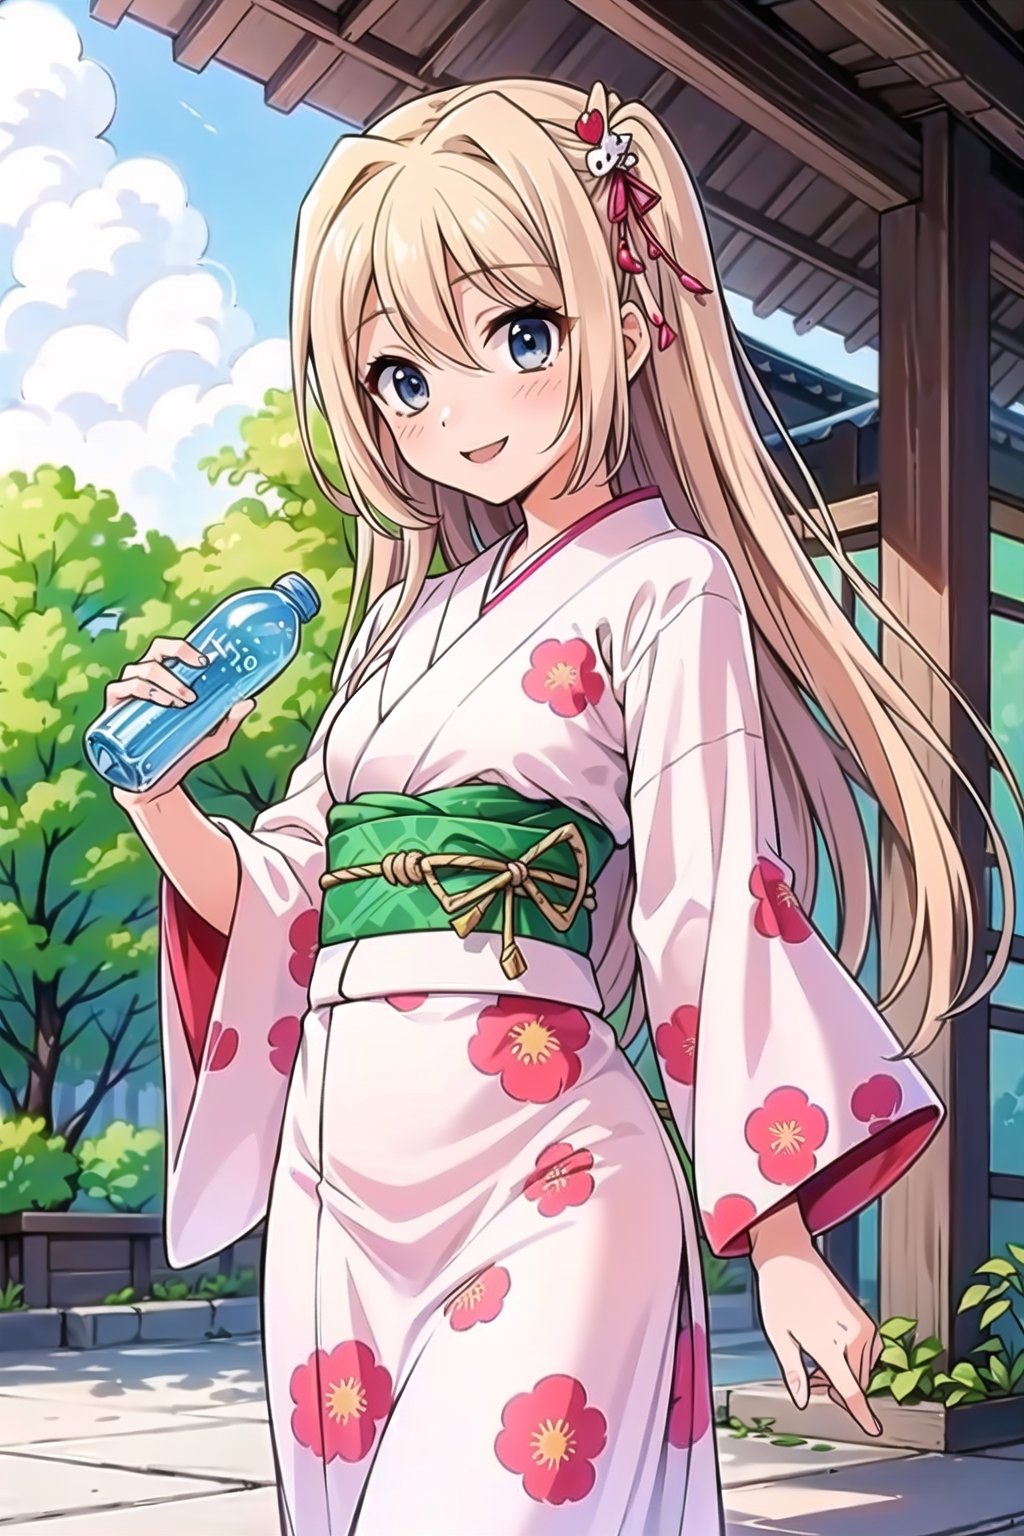 (Best Picture Quality, High Quality, Best Picture Score: 1.3), ((Sharp Picture Quality)), Perfect Beauty Score: 1.5, , Blonde Hair, (Japanese Clothes), One Person, (Cute Outfit), Red Hairpiece, Beautiful Girl, Cute, (Drinking Ramune from a Bottle), Fashionable Coffee Shop, Great Smile,. 